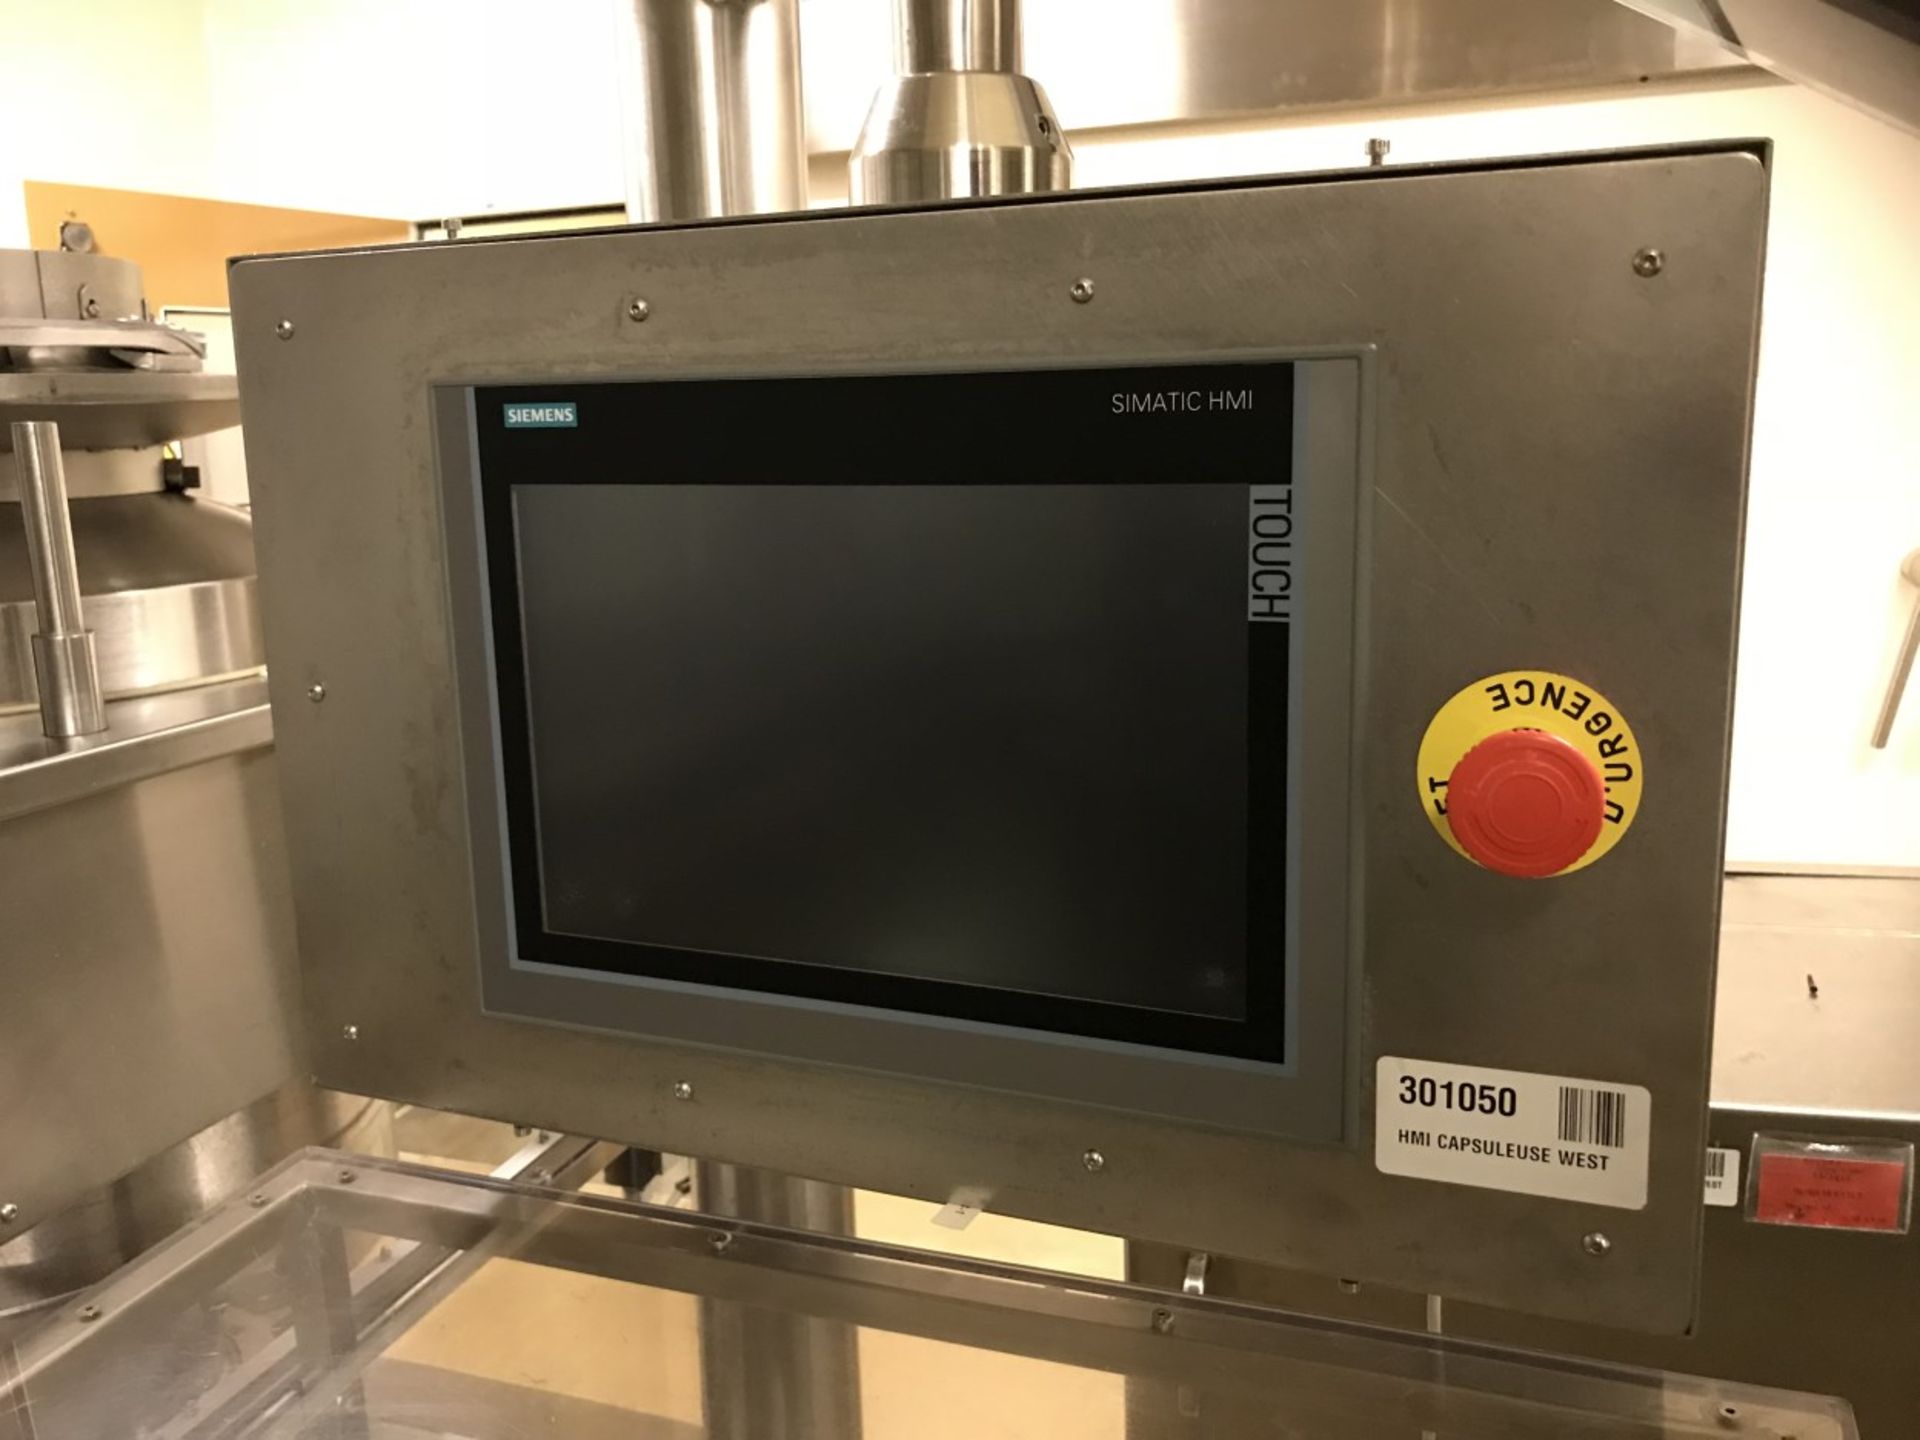 Dual Syringe Loading & Capping System w/ Siemens Simatic HMI Touch Screen Controls - Image 11 of 12